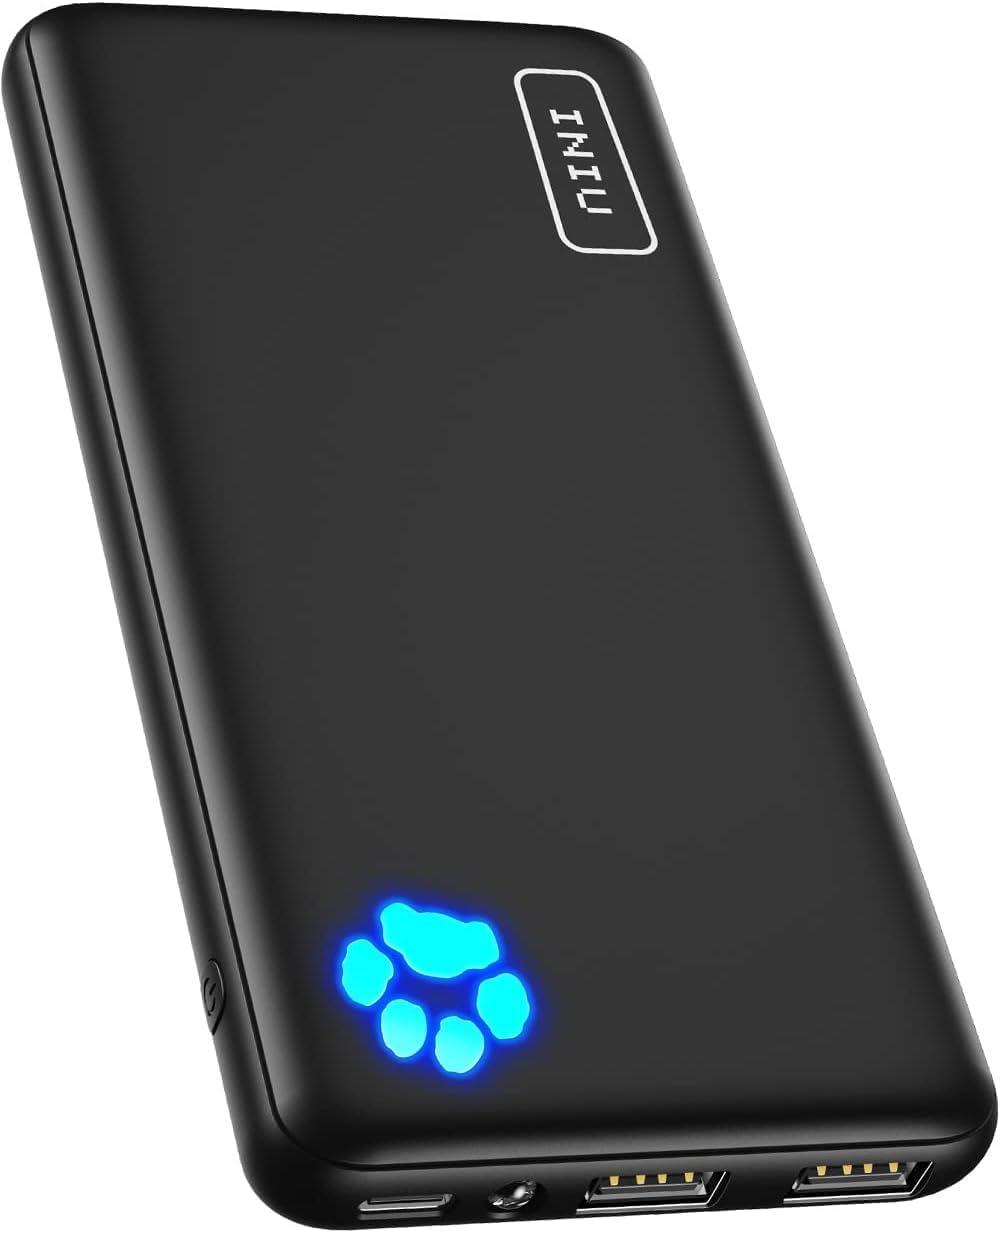 iniu portable charger slimmest 10000mah 5v/3a power bank usb c in and out high-speed charging battery pack